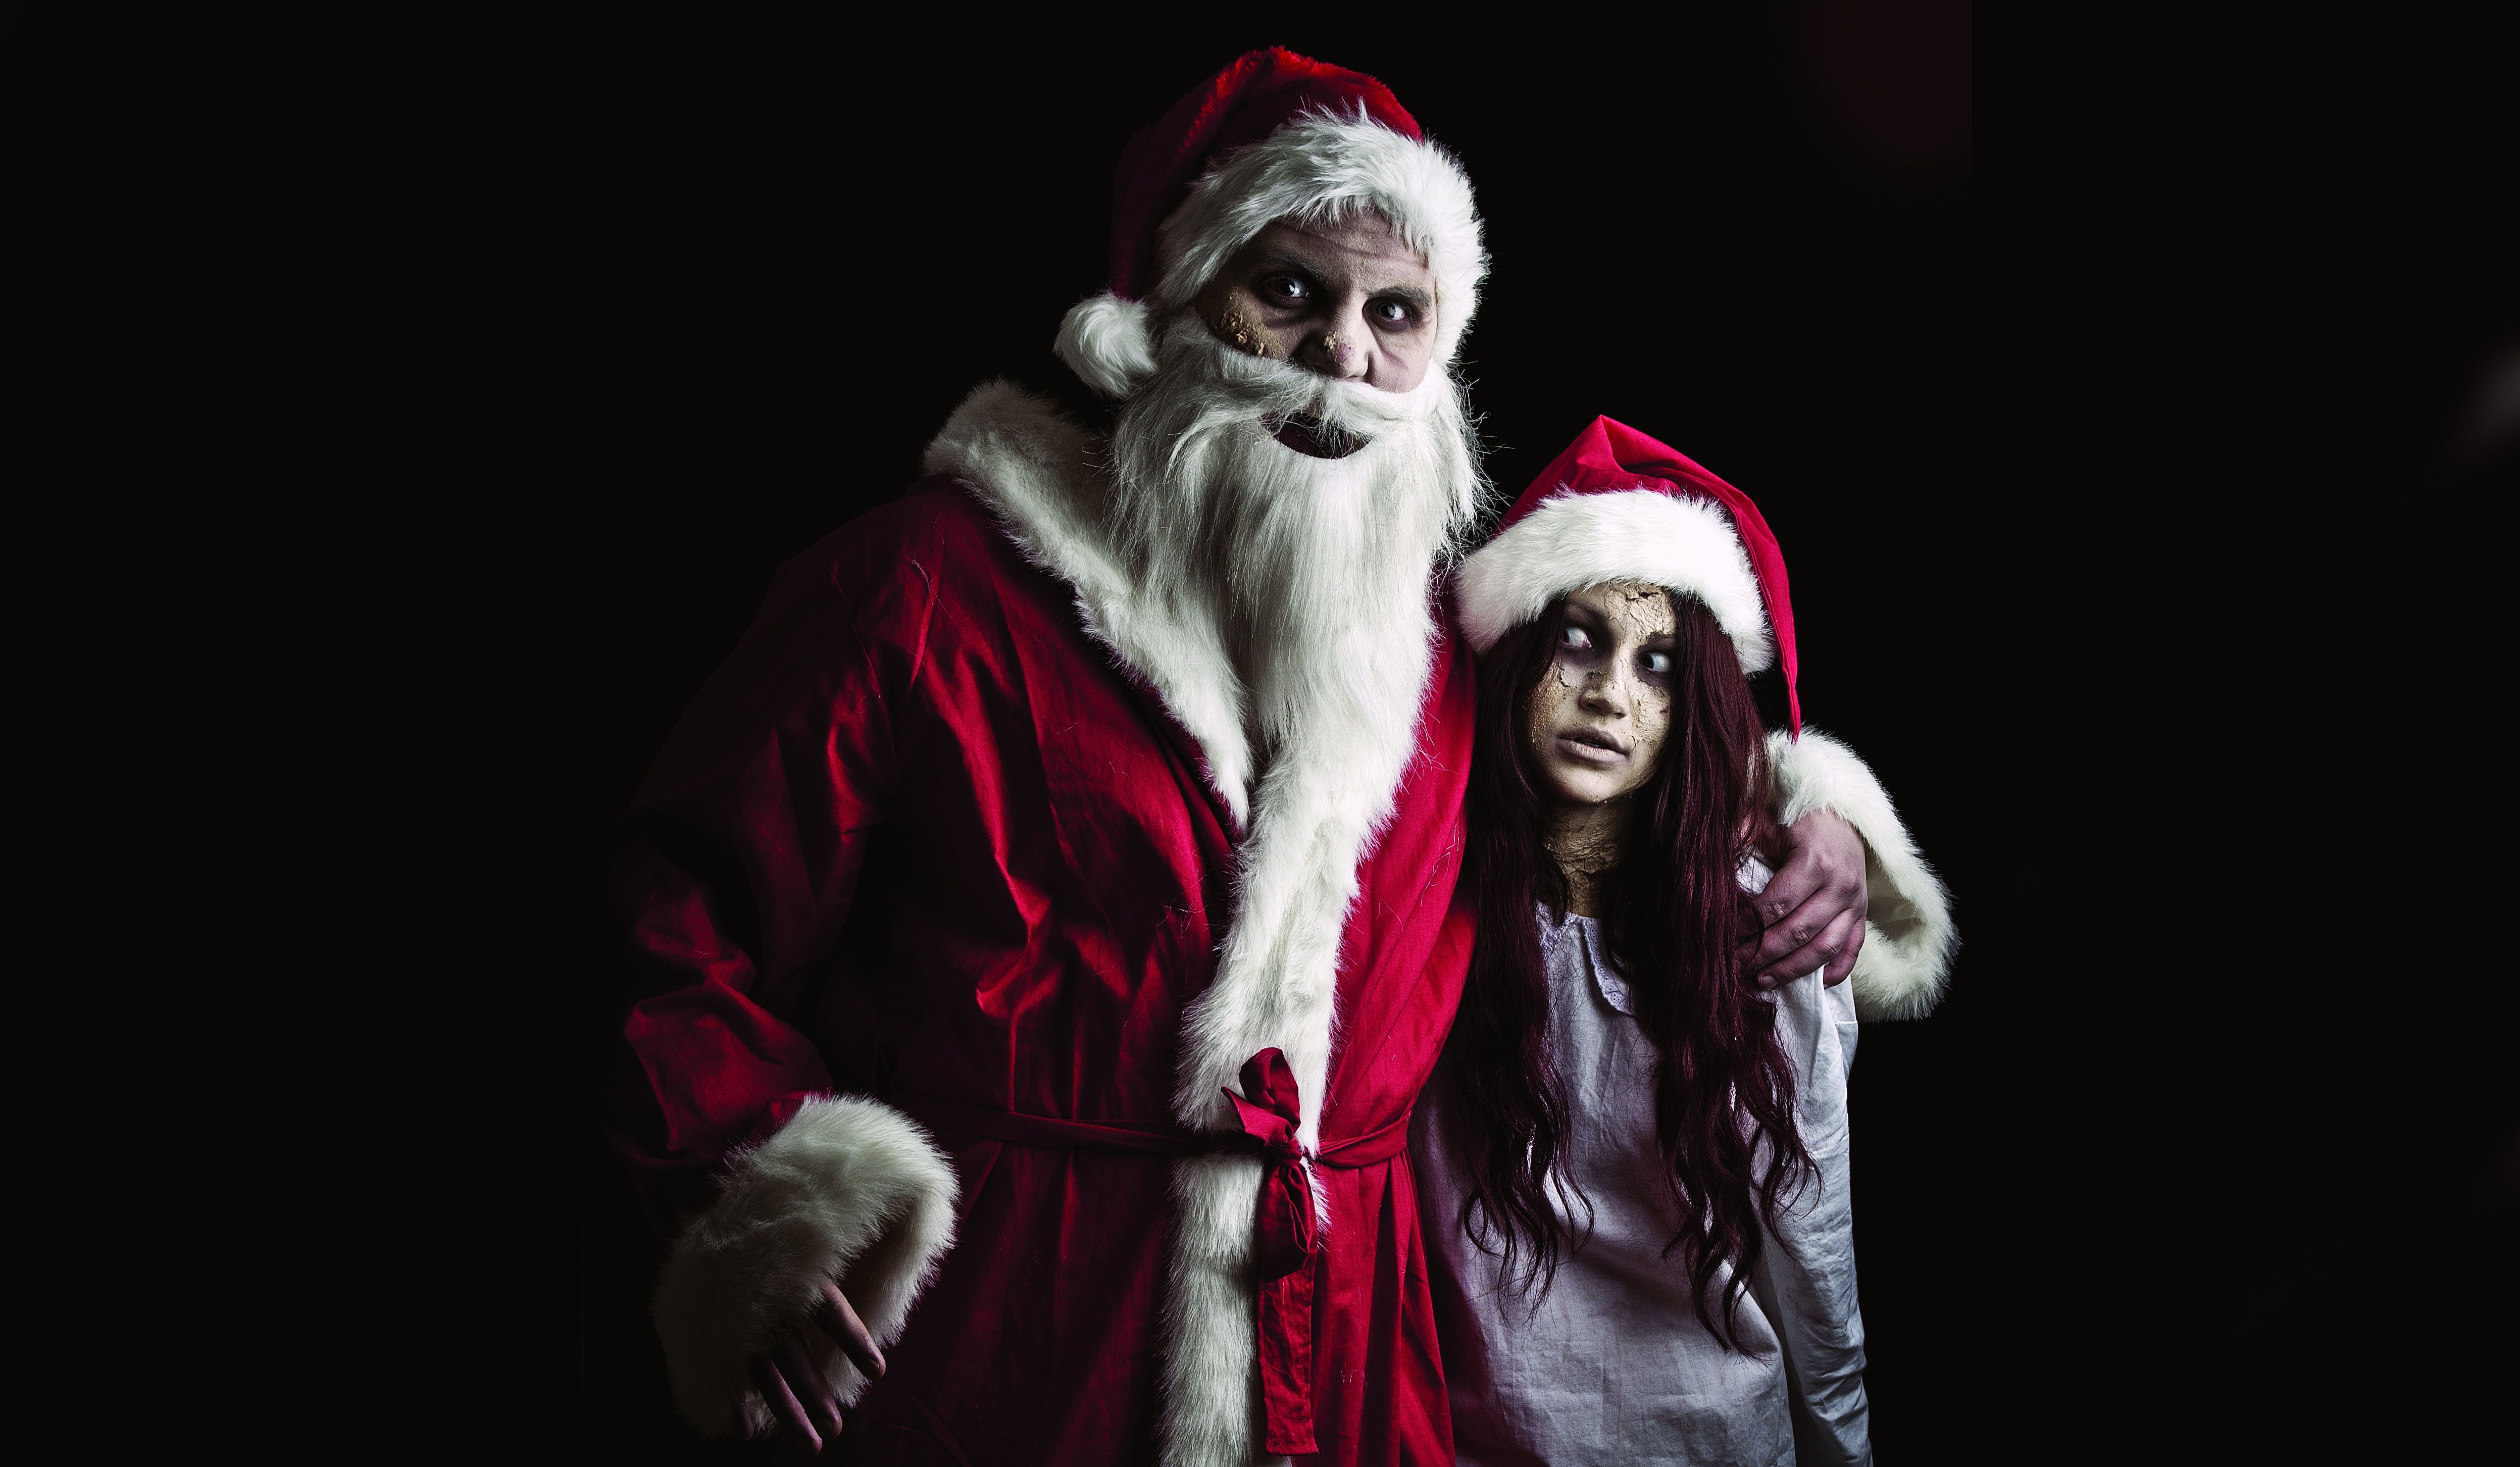 Santa Claus zombie wallpapers and images - wallpapers, pictures ...